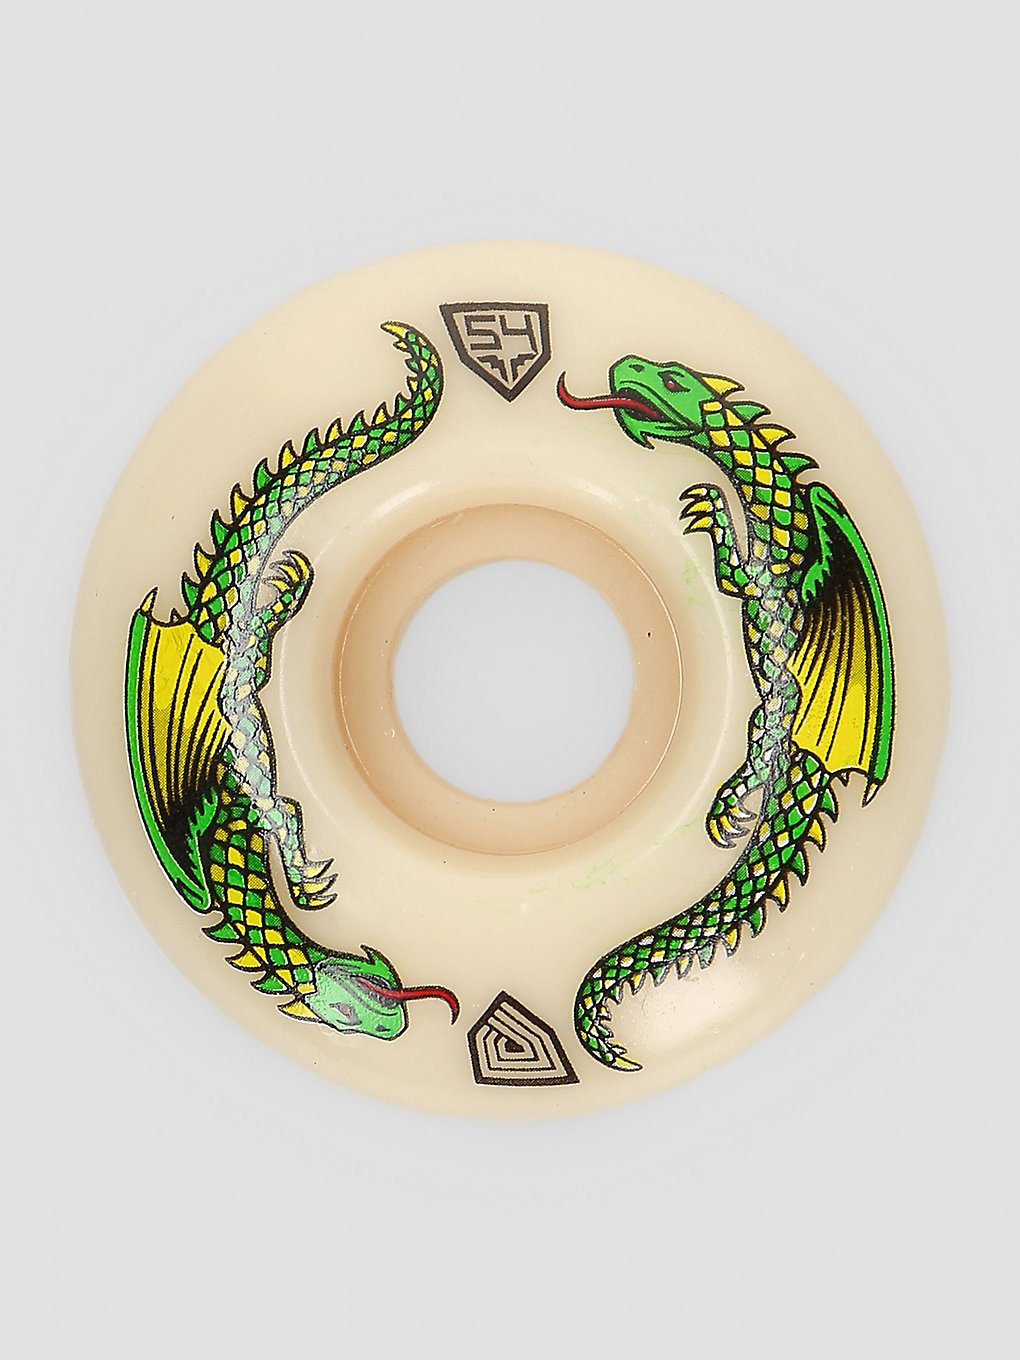 Powell Peralta Dragons 93A V4 Wide 54mm Wheels offwhite kaufen